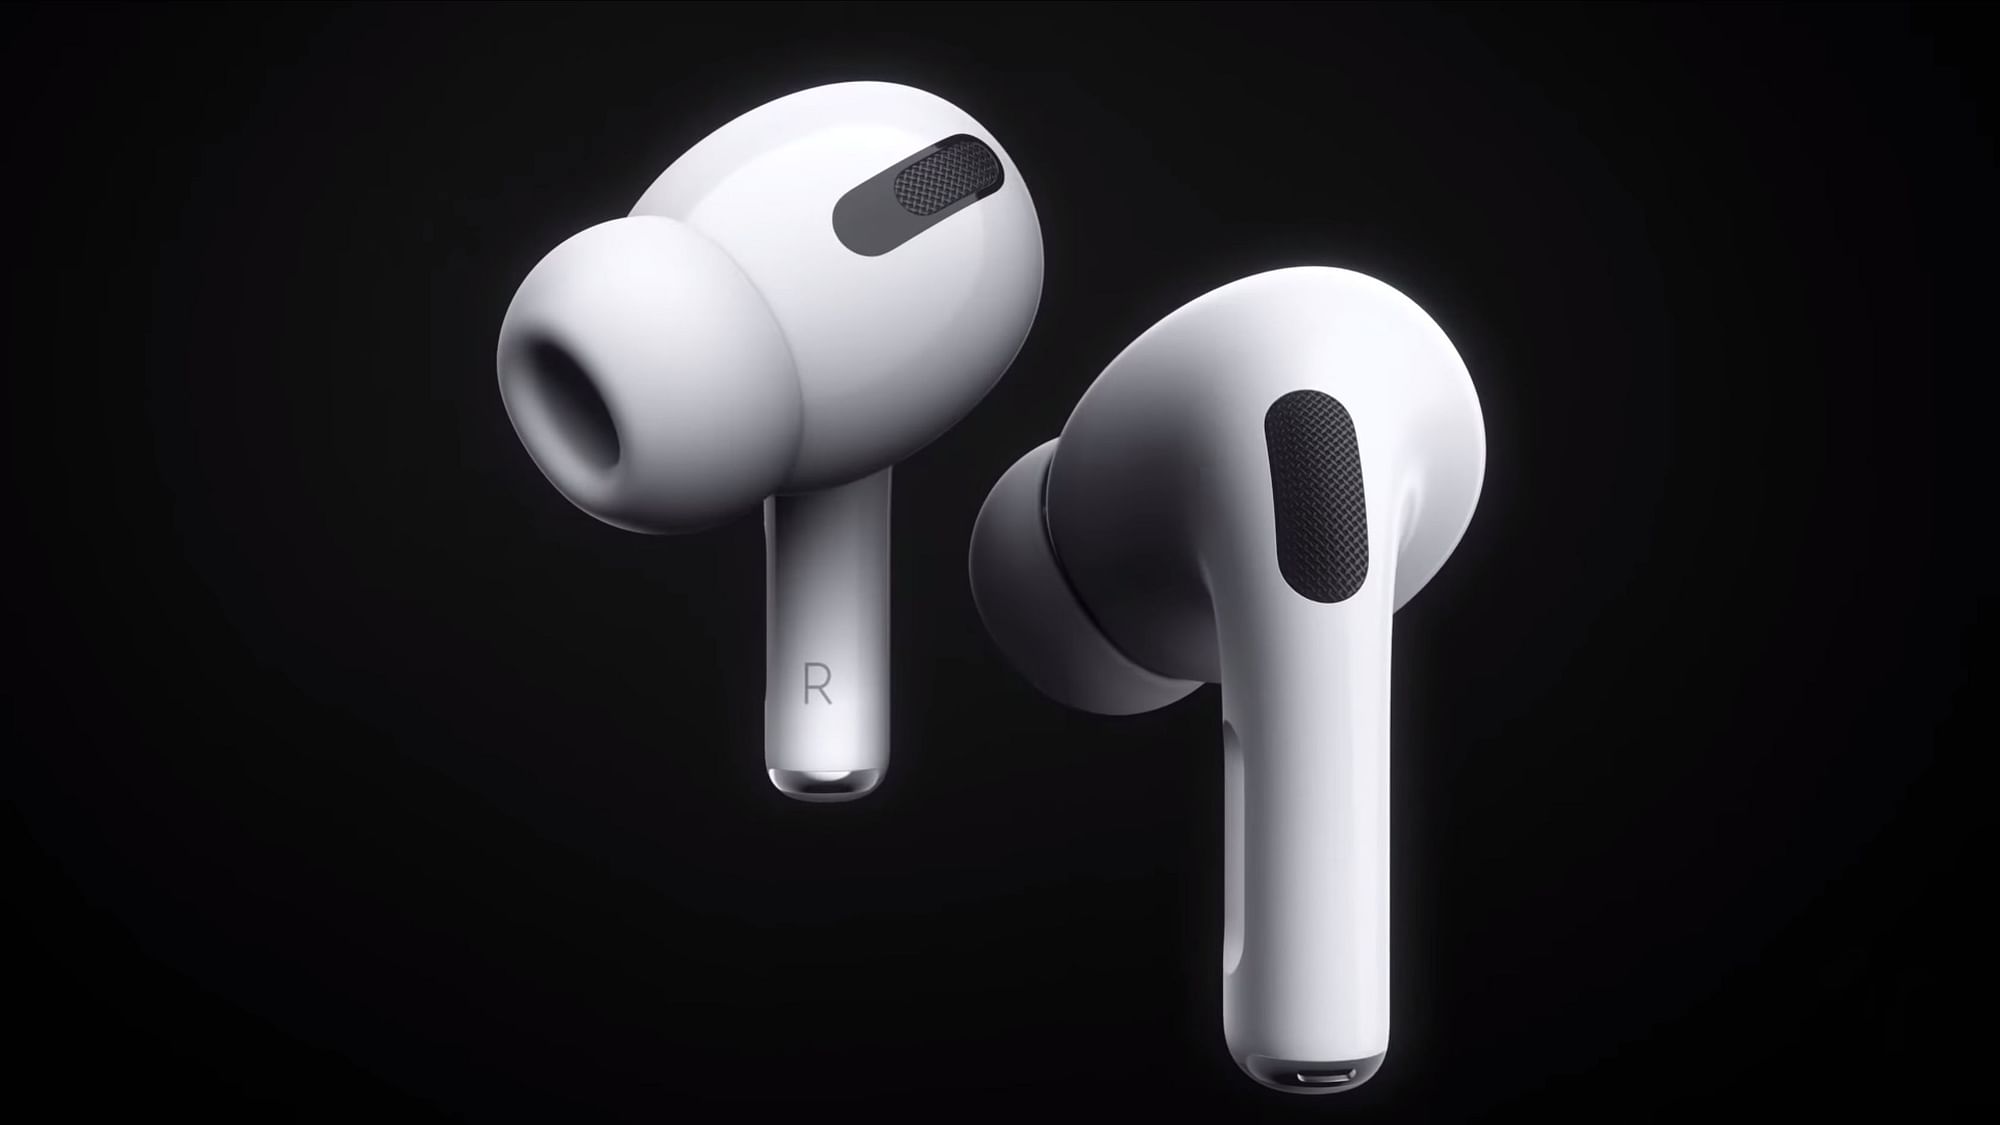 The new Apple AirPods Pro